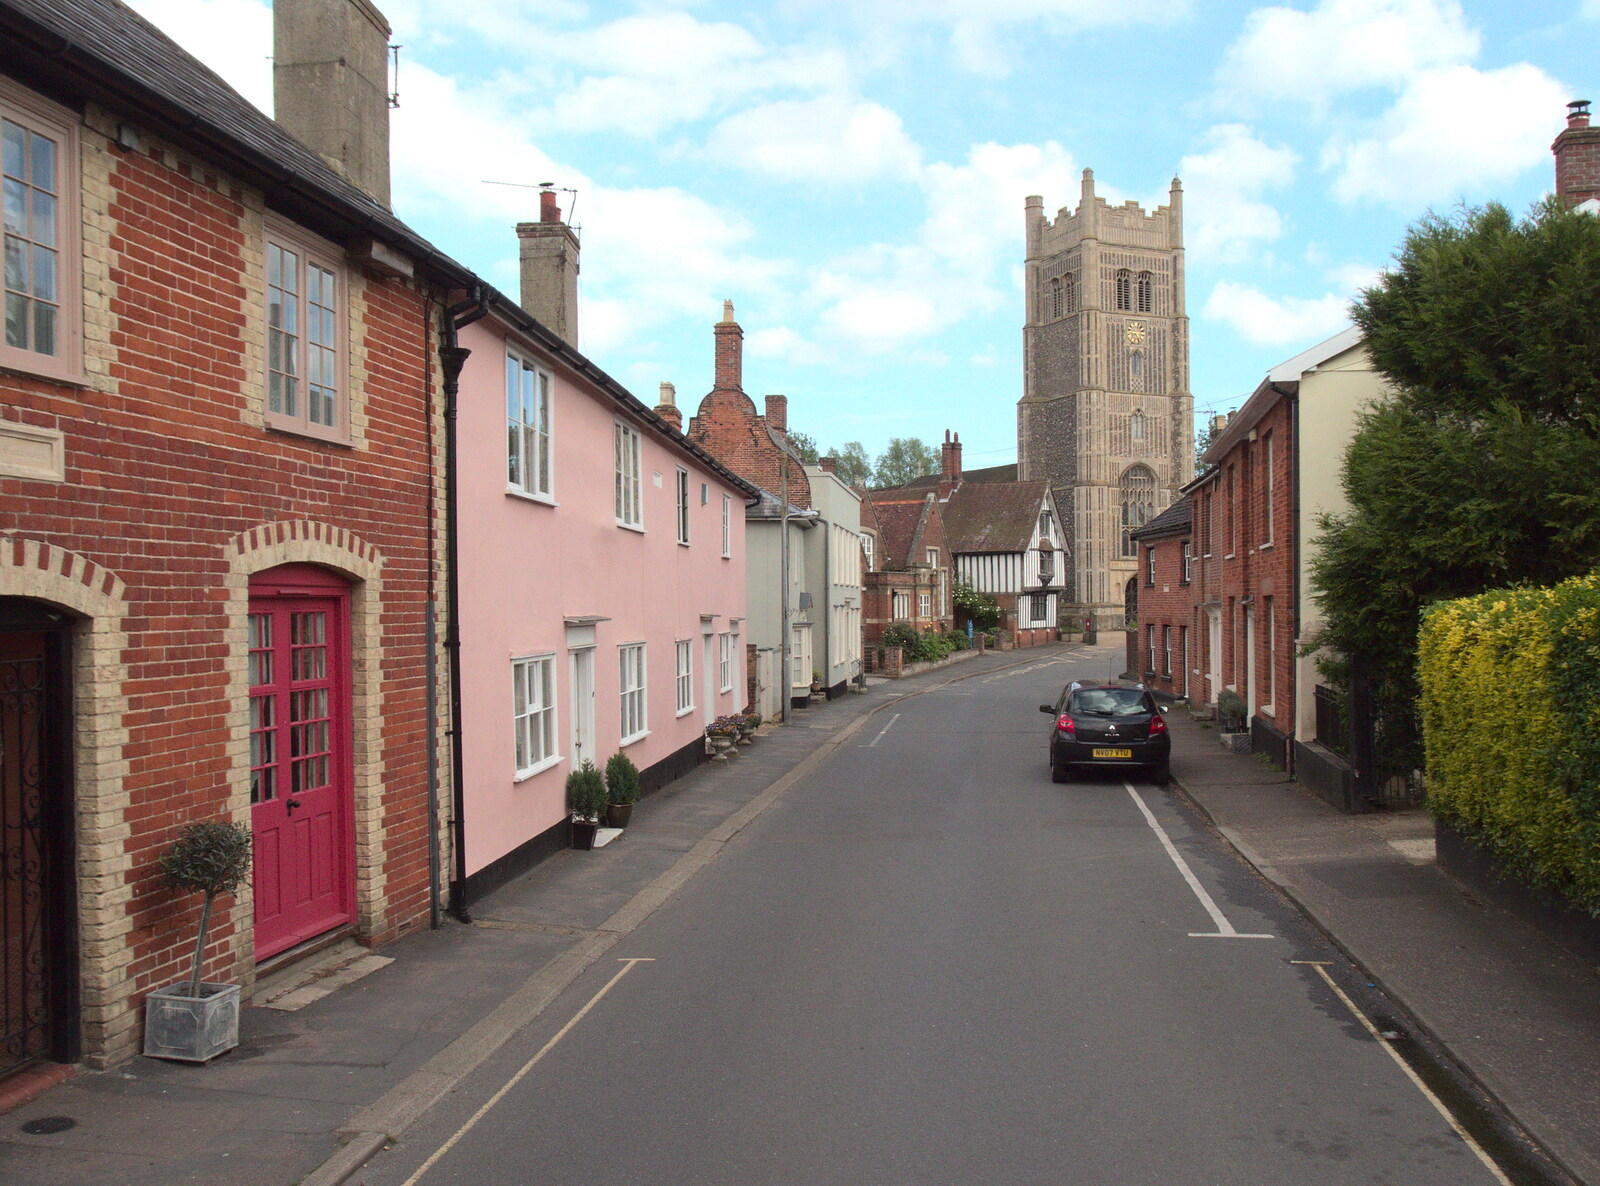 Church Street in Eye from Clive and Suzanne's Party, Braisworth, Suffolk - 21st May 2017